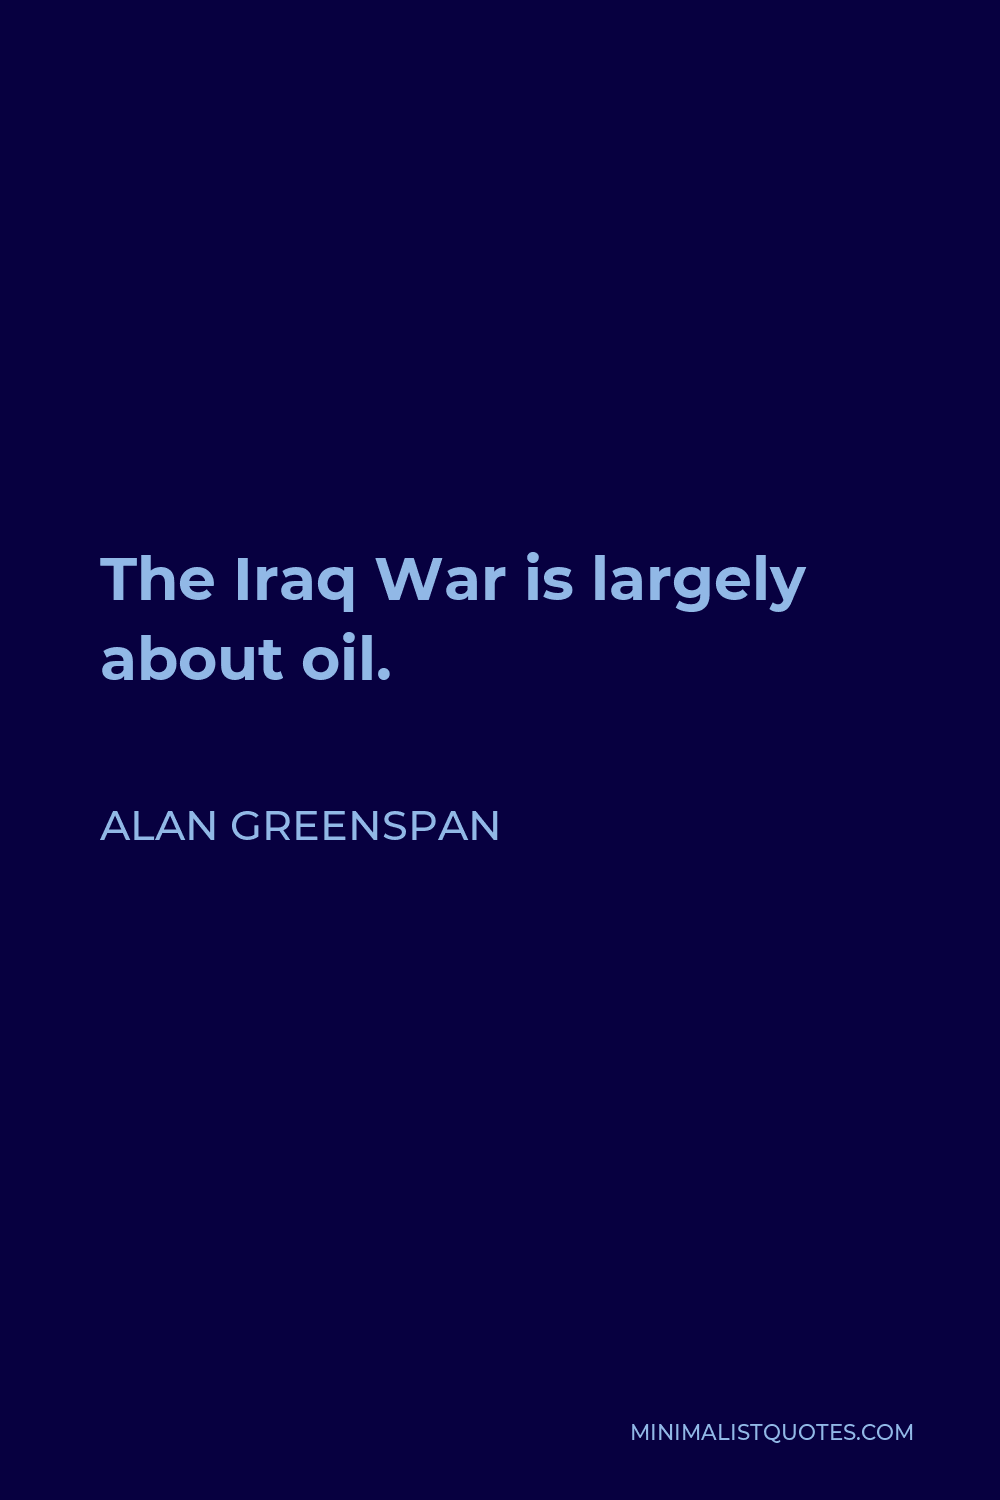 Alan Greenspan Quote - The Iraq War is largely about oil.